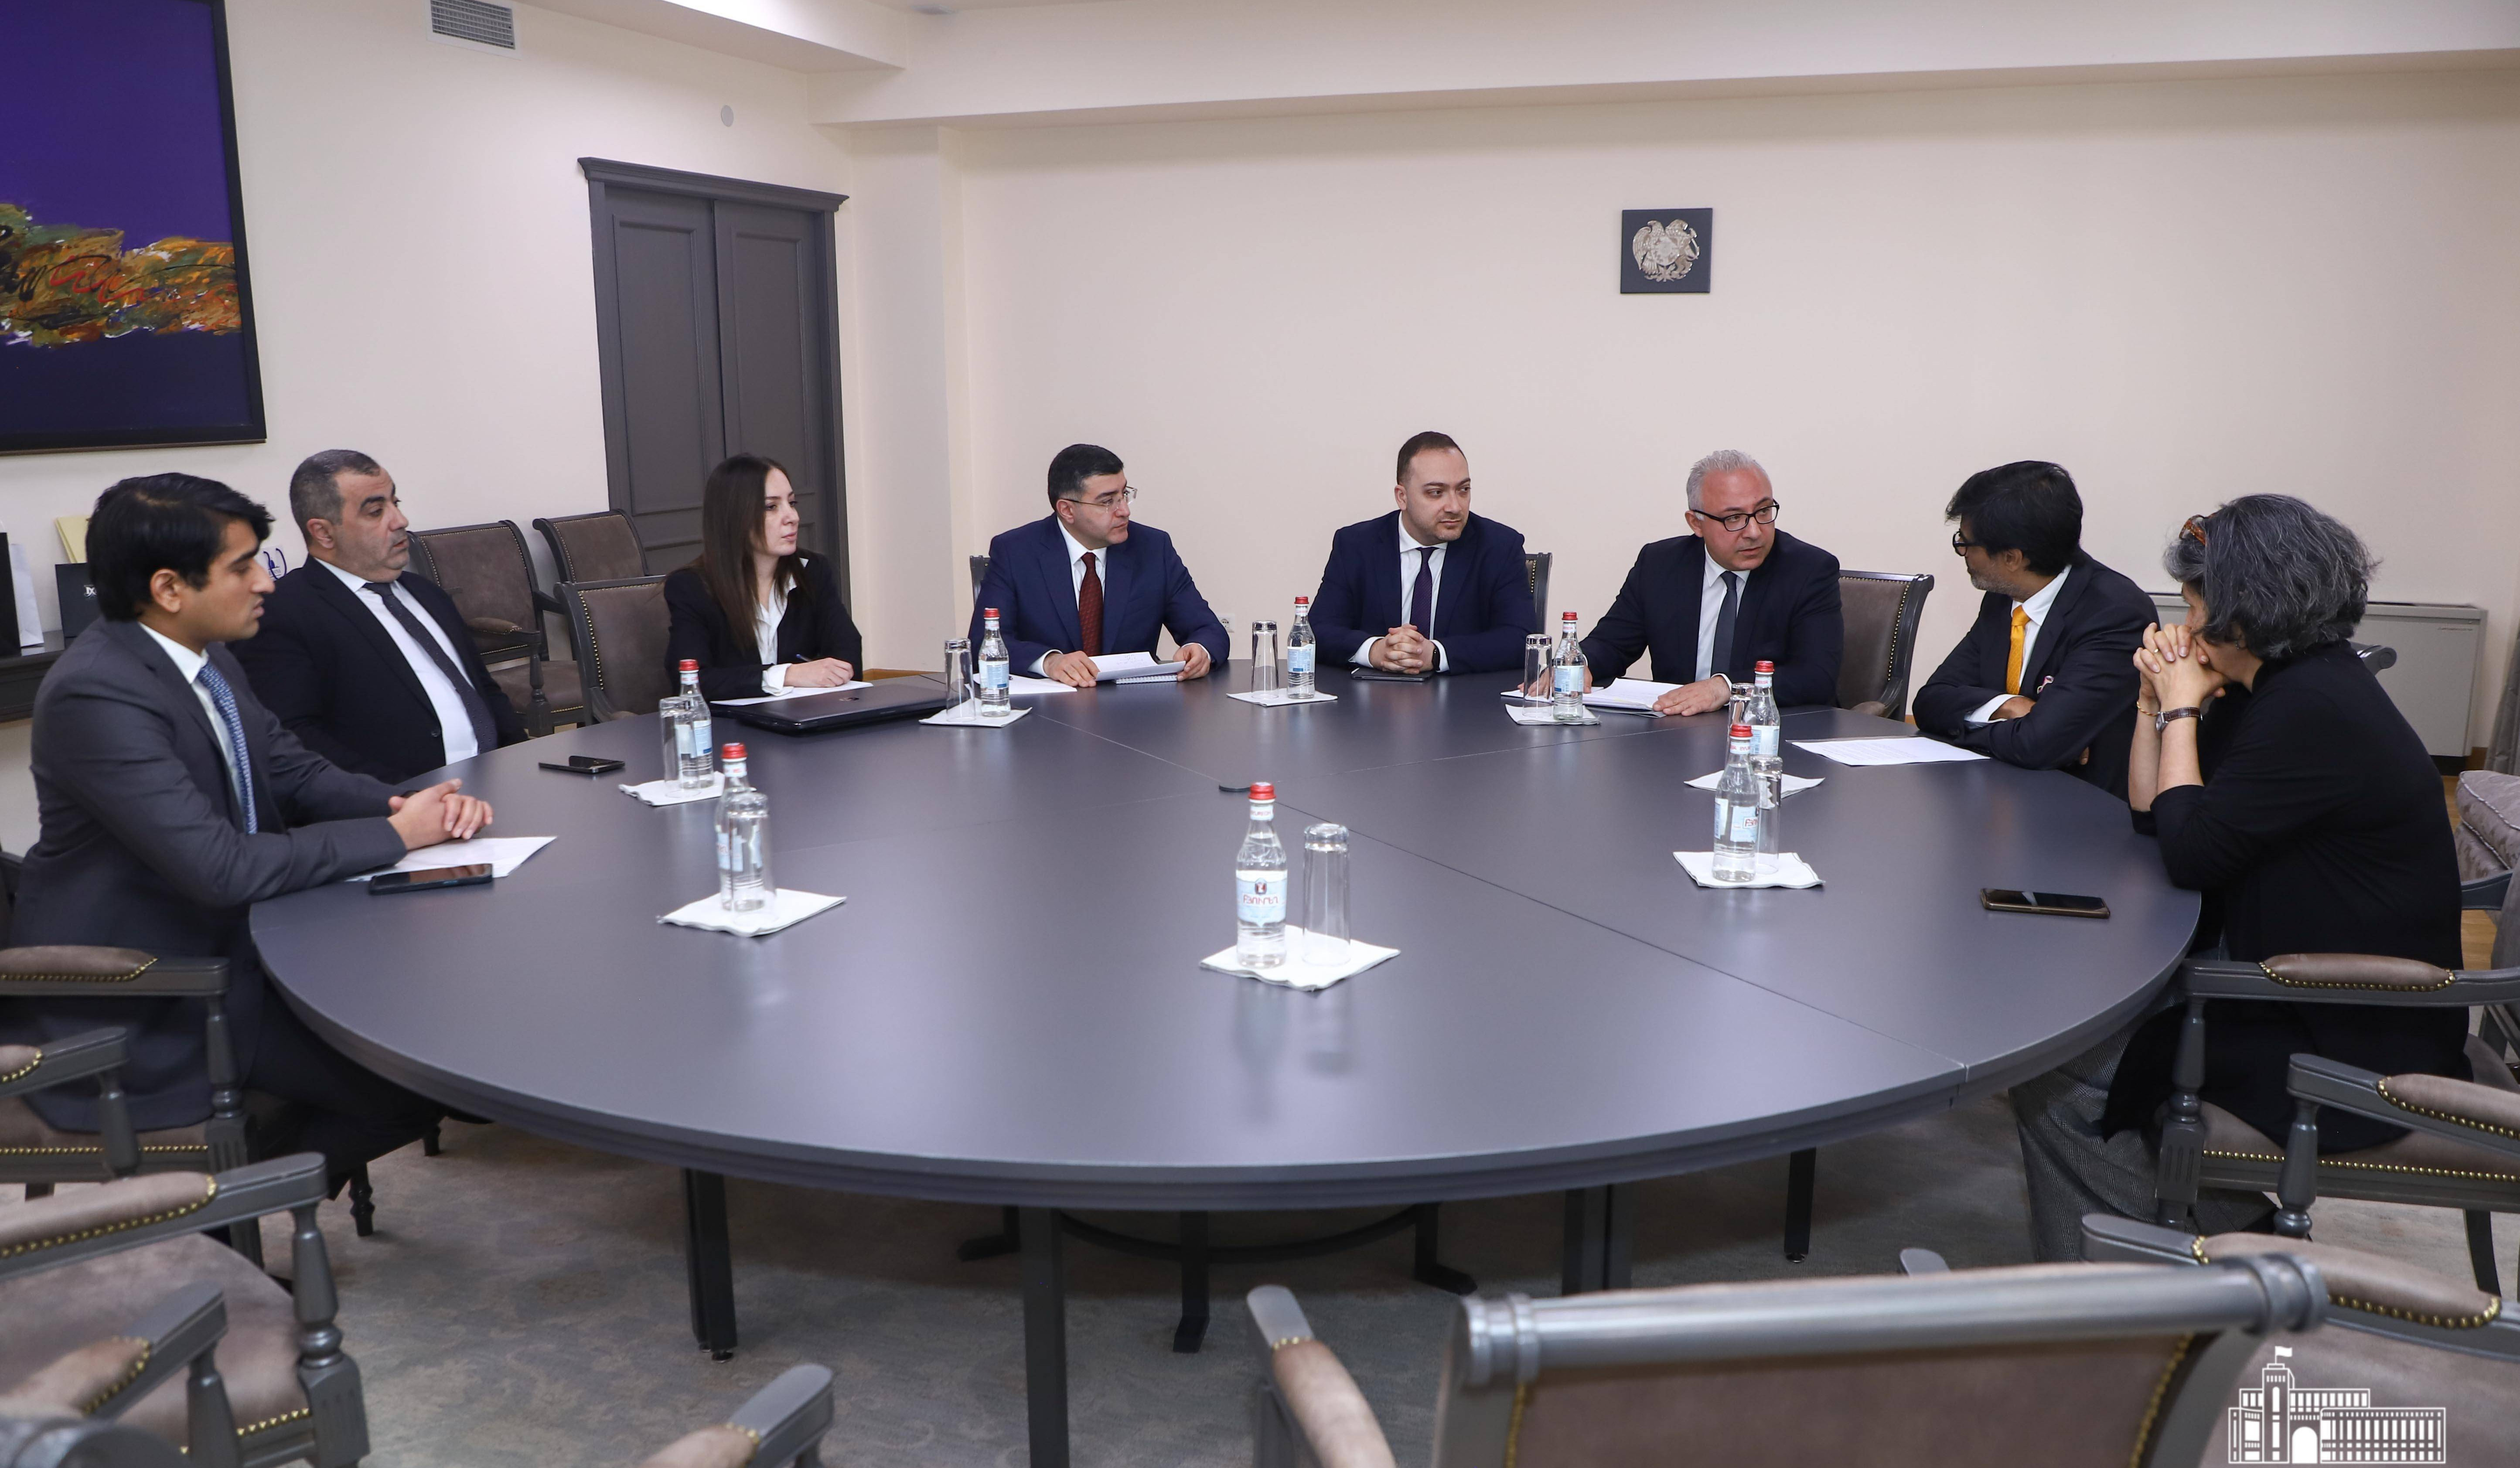 Meeting of Deputy Foreign Minister of Armenia with President of premier Indian think tank 'Observer Research Foundation' (ORF)